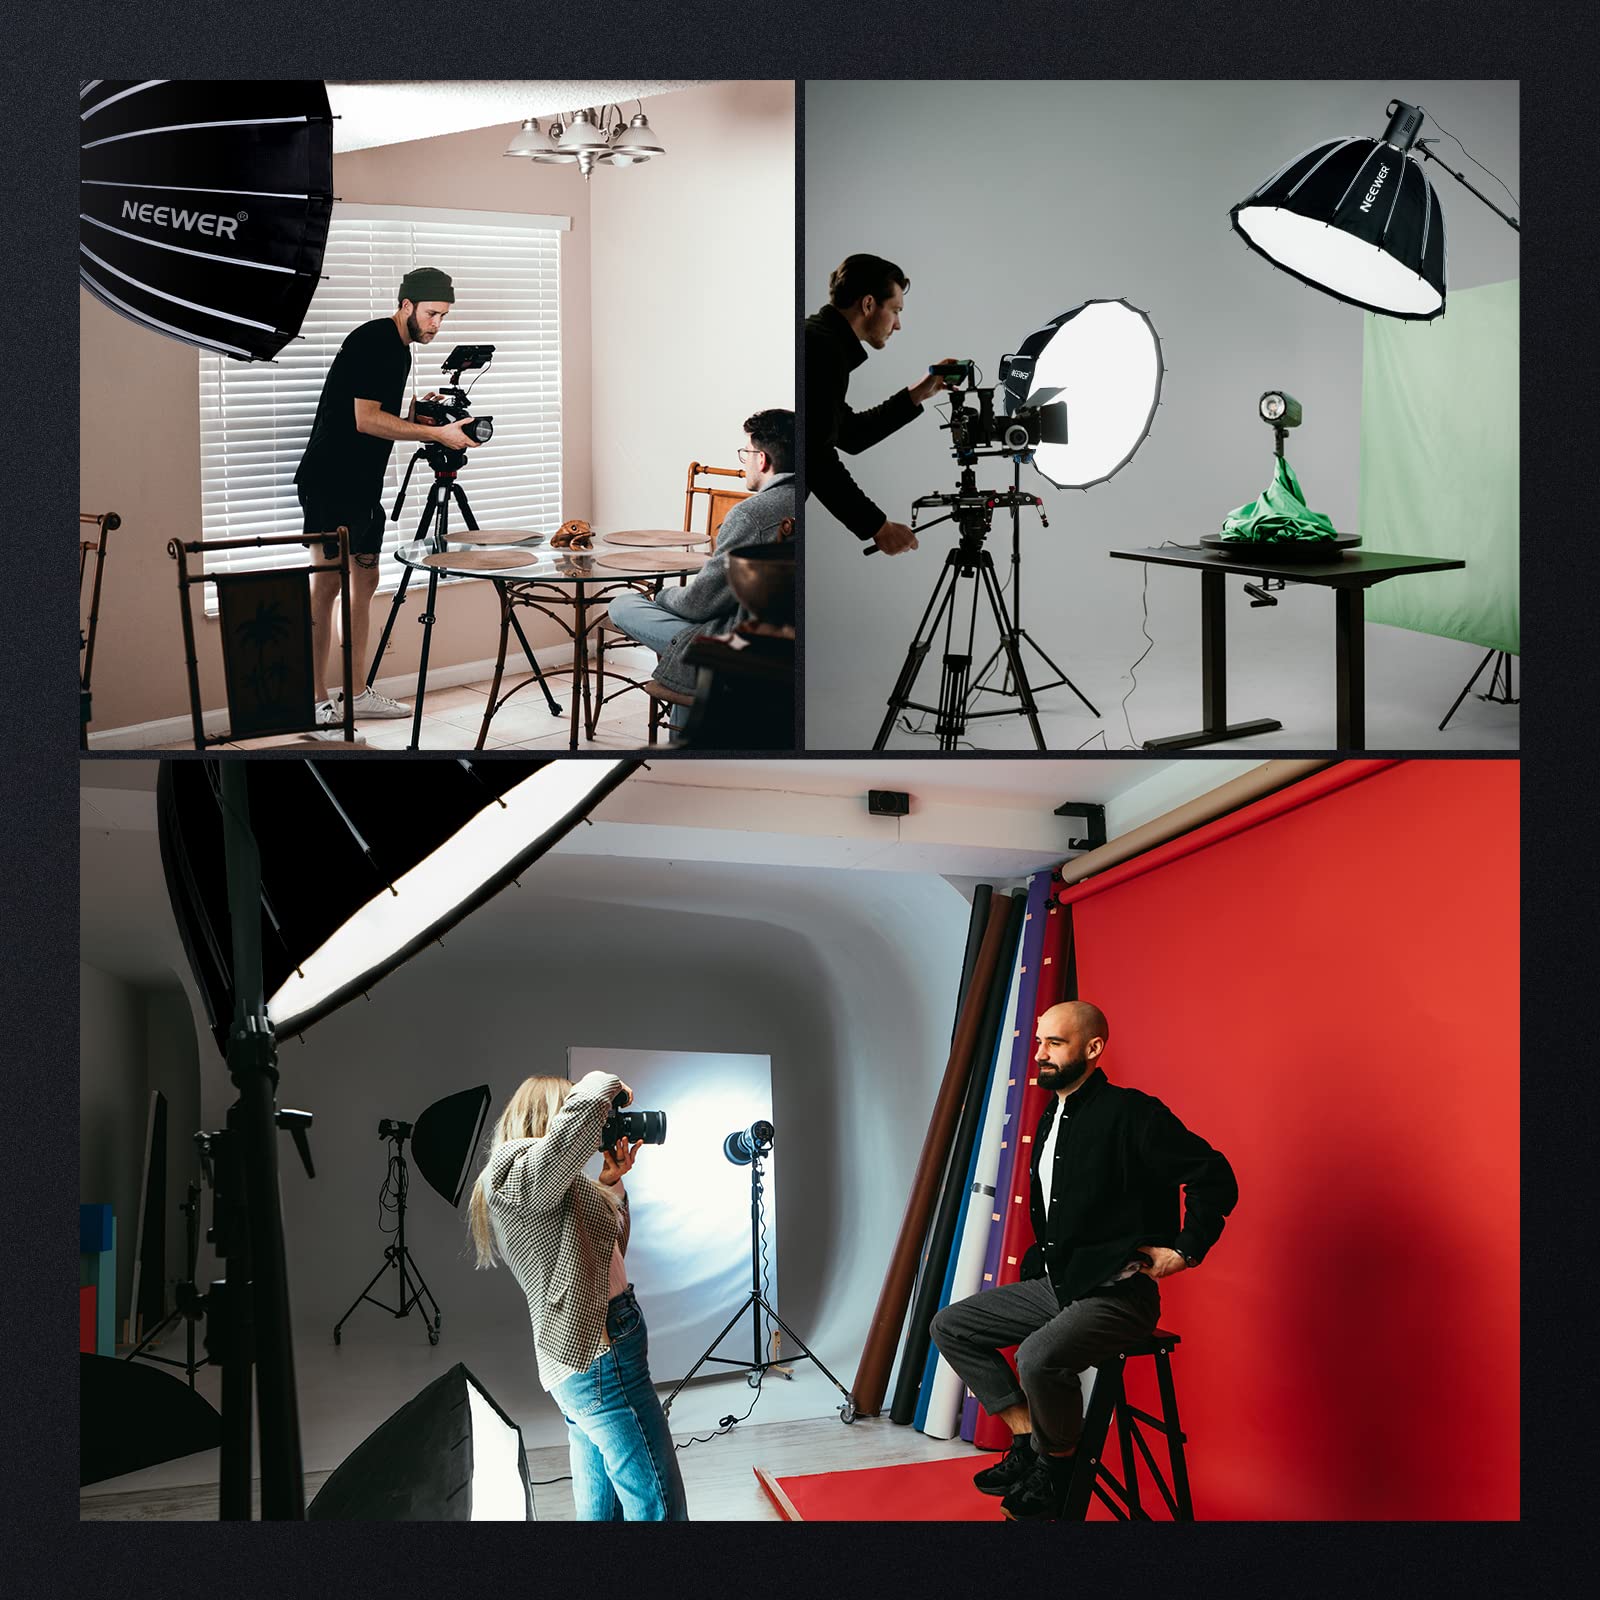 NEEWER 33inch/85cm Parabolic Softbox Quick Set up Quick Folding, with Diffusers/Honeycomb Grid/Bag, Compatible with Aputure 120d Light Dome Godox sl60w NEEWER RGB CB60 and Other Bowens Mount Lights